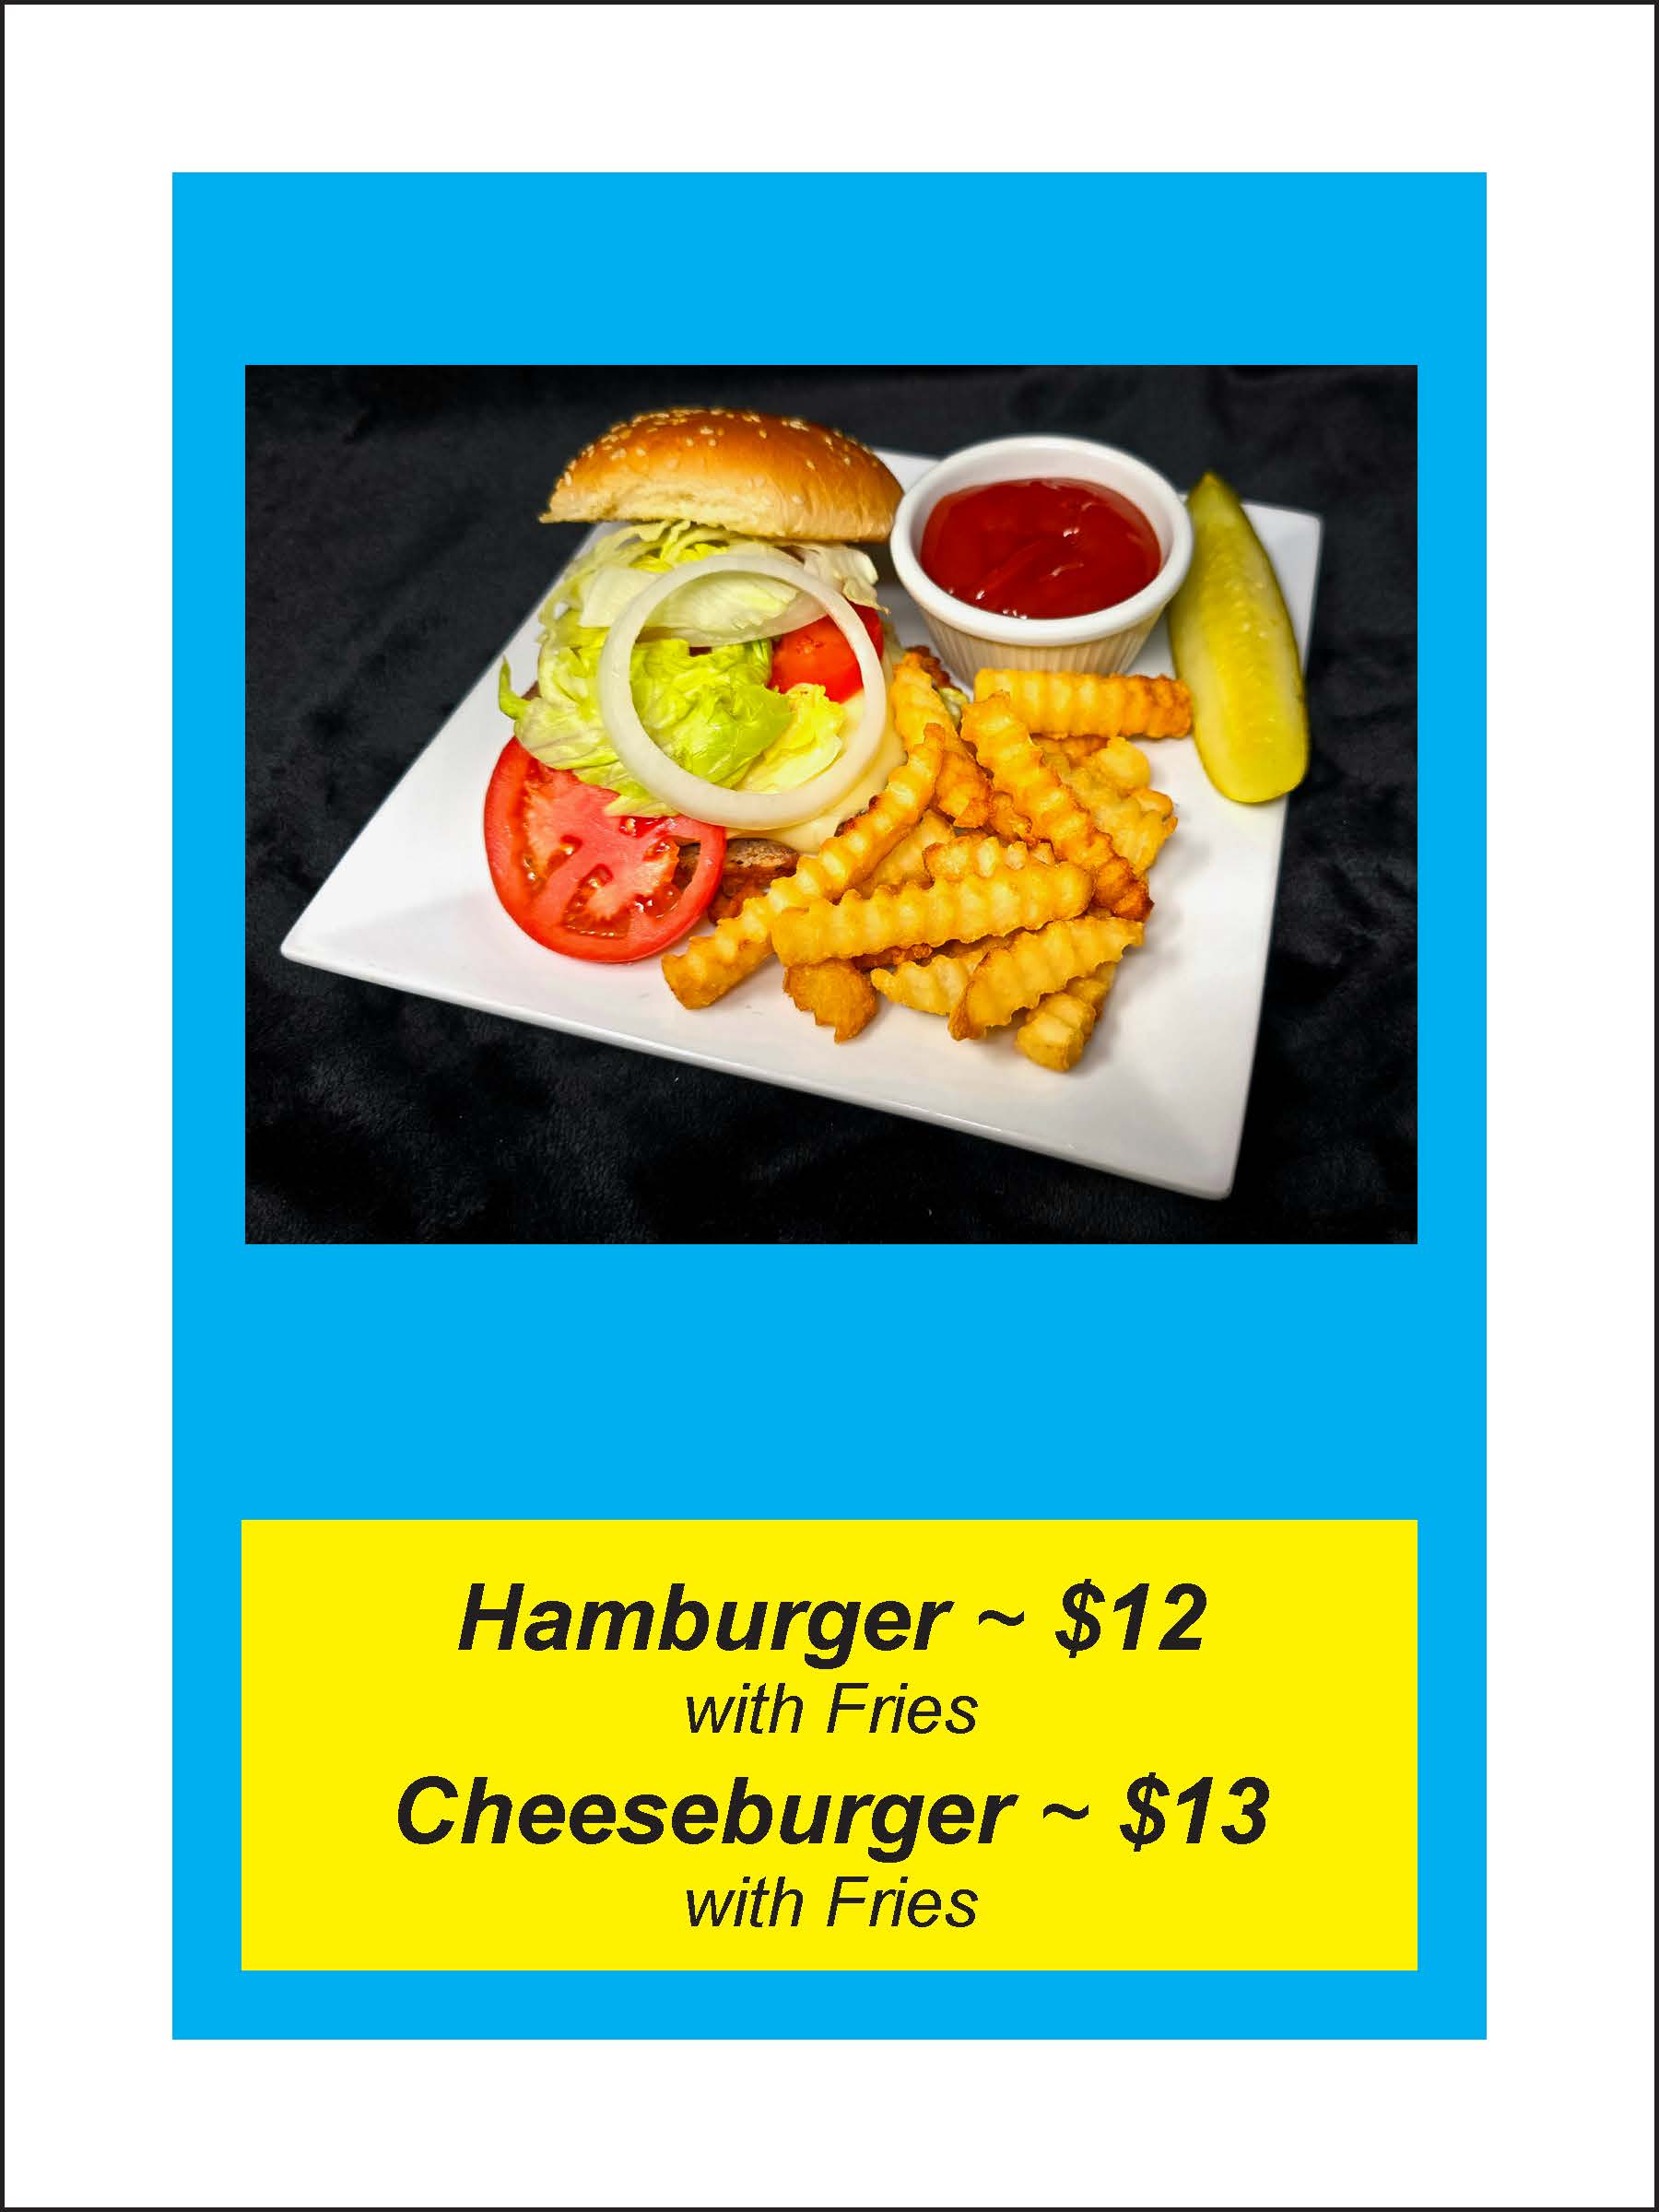 A plate with a hamburger, crinkle-cut fries, a pickle, and a side of ketchup. Text below states: "Hamburger ~ $12 with Fries, Cheeseburger ~ $13 with Fries.